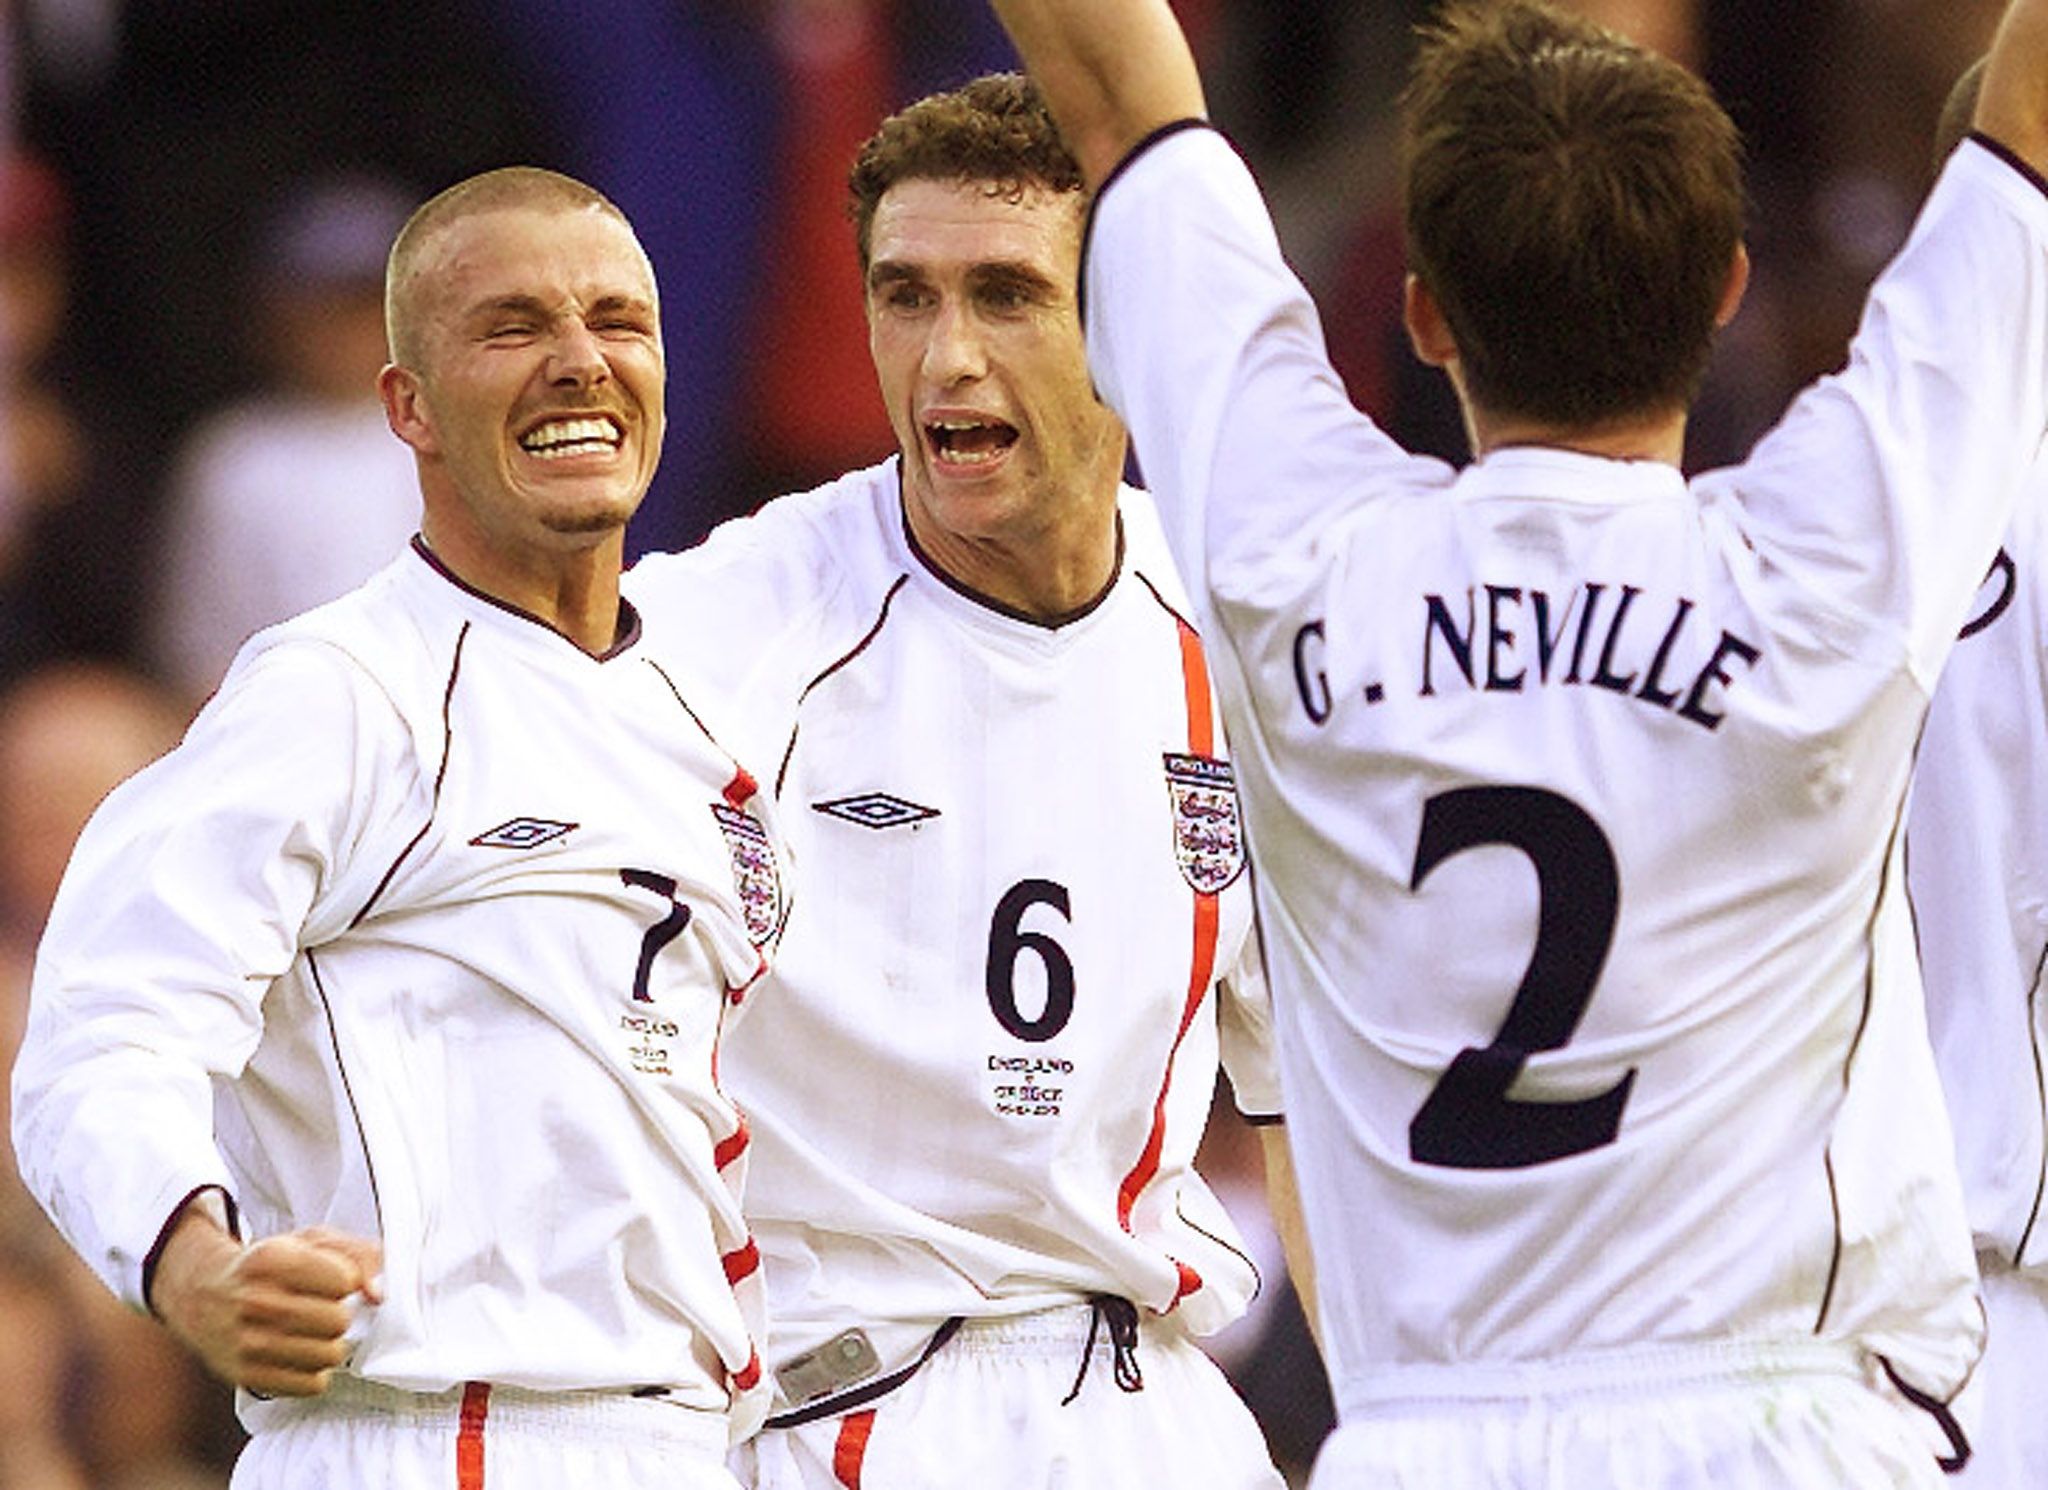 England captain David Beckham (L) celebrates with team mates Martin
Keown (C) and Gary Neville (R) after drawing with Greece in their World
Cup group nine qualifing match at Old Trafford, Manchester October 6,
2001. The match finished 2-2 meaning that England qualifies for the
World Cup finals of 2002 in South Korea and Japan. REUTERS/Ian Hodgson

IH/NMB